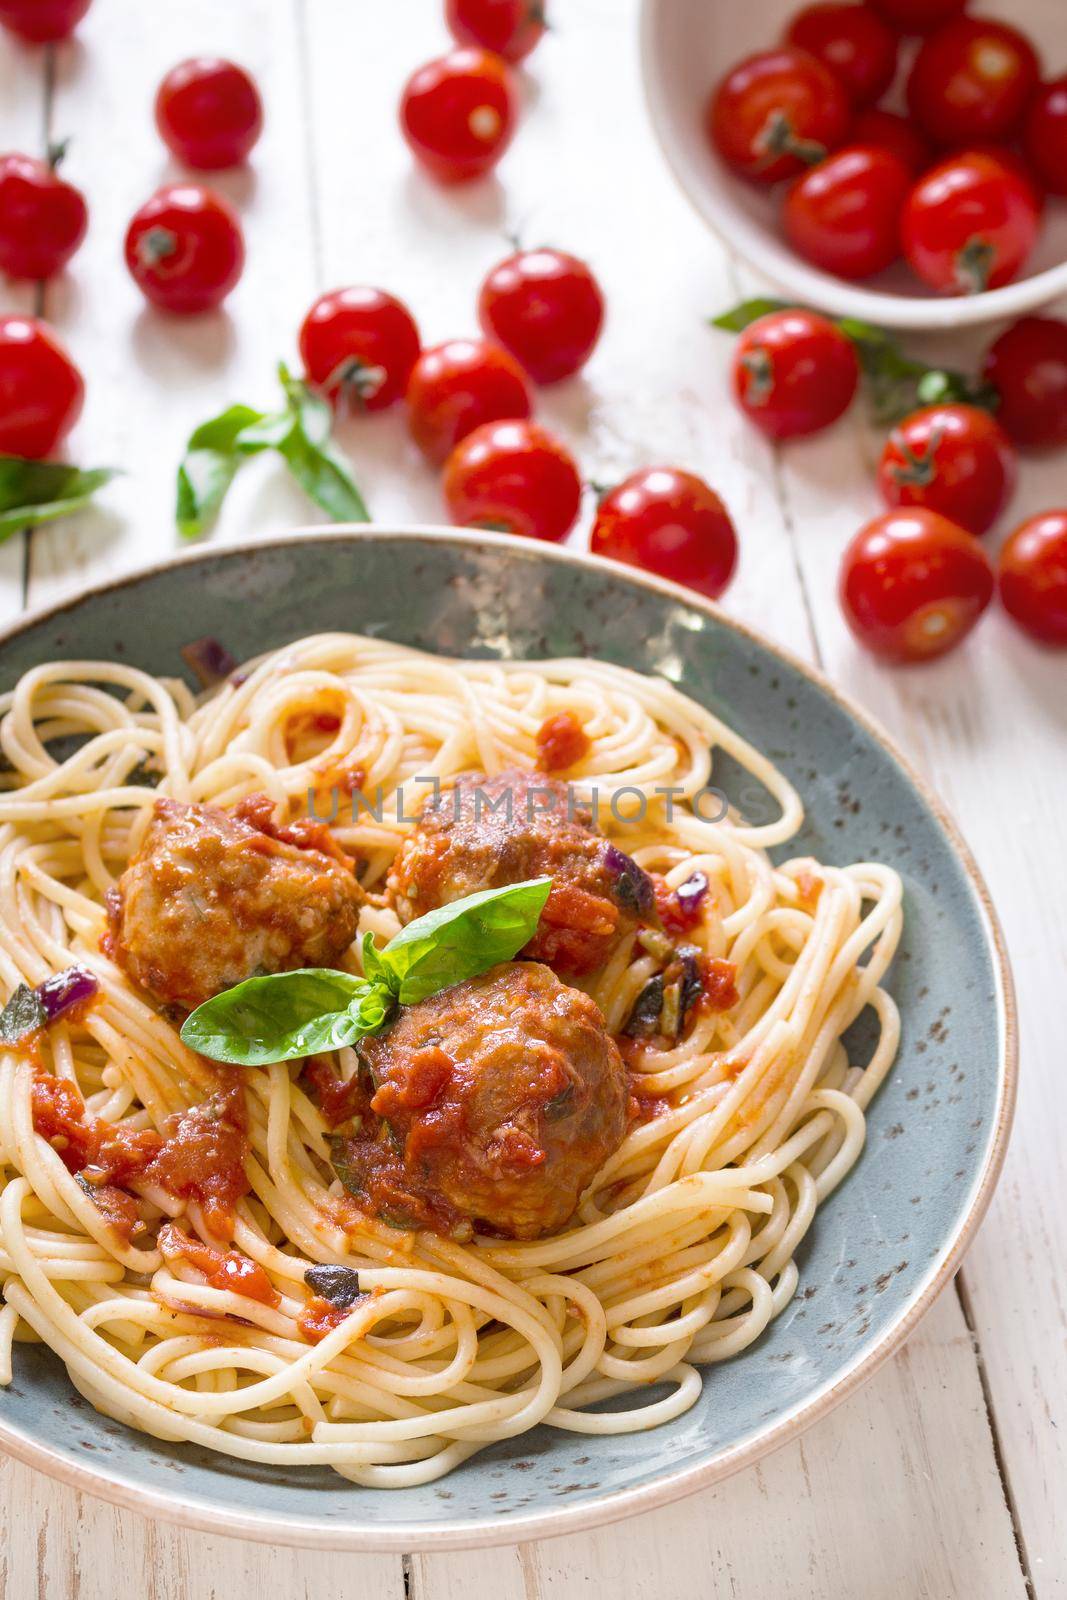 Close-up of delicious spaghetti with meatballs and tomato sauce on a plate. Serving on a white rustic wooden table. An Italian-American dish. Selective focus